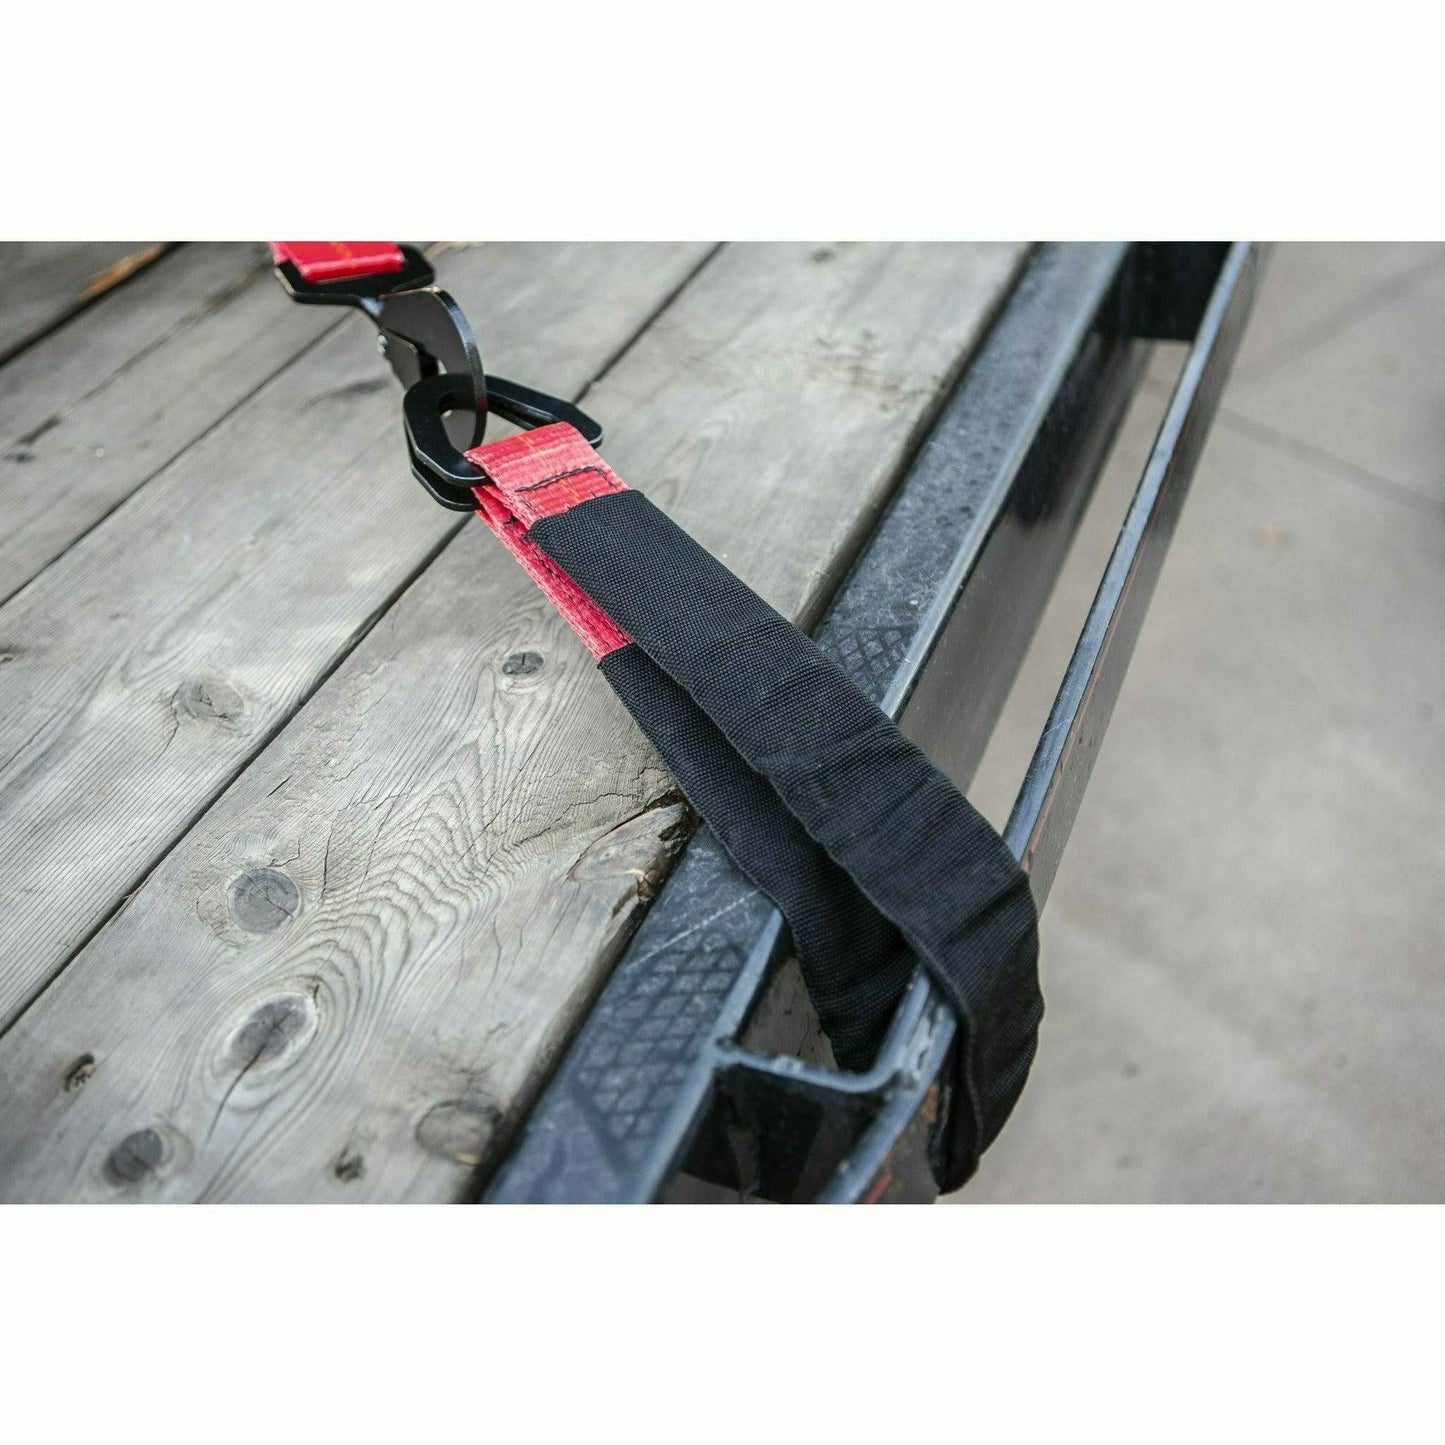 2"x24" Axle Strap with D-Rings